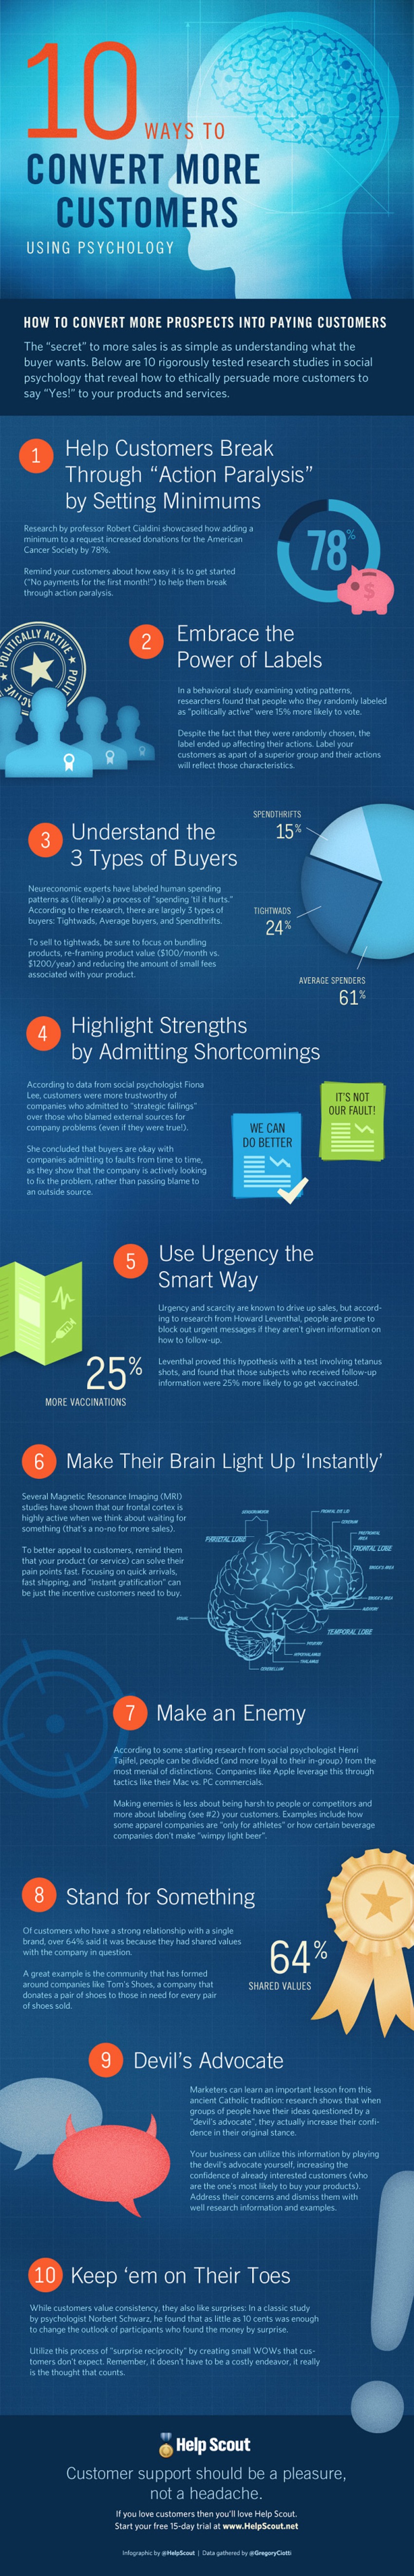 10 Ways to Increase Conversions Using Psychology [Infographic] - HubSpot | The MarTech Digest | Scoop.it